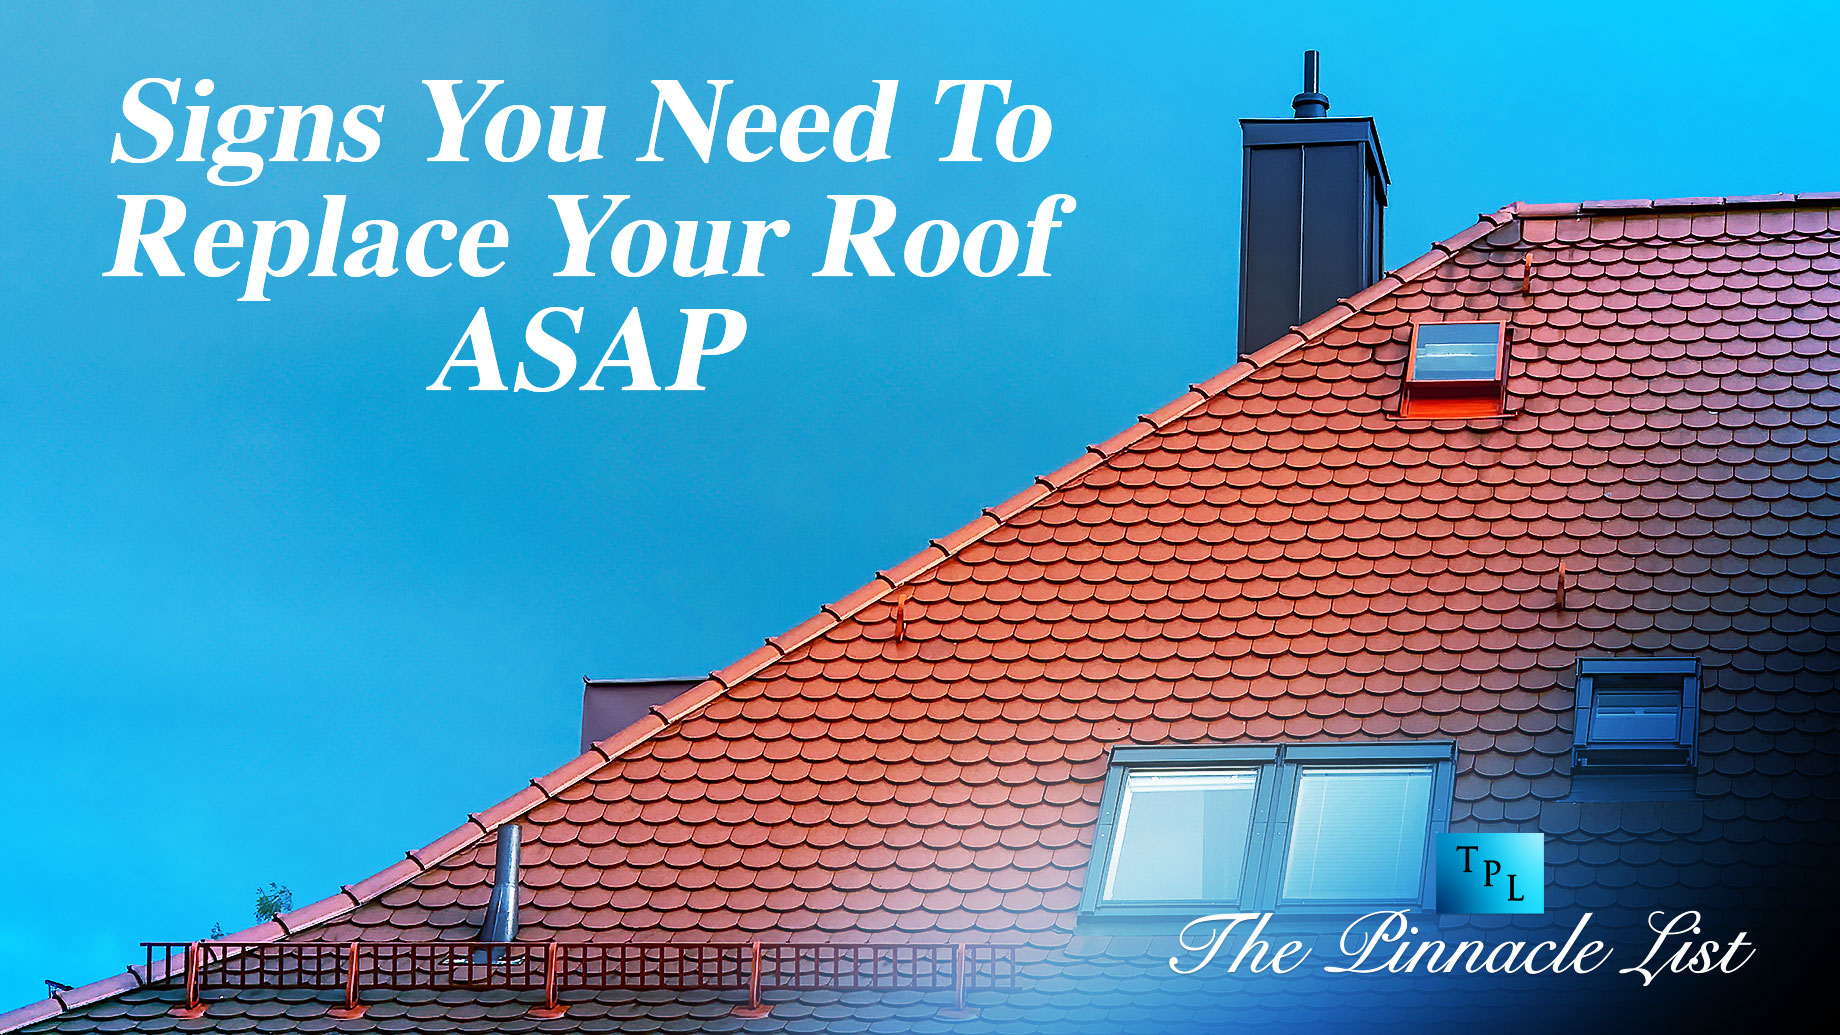 Signs You Need To Replace Your Roof ASAP